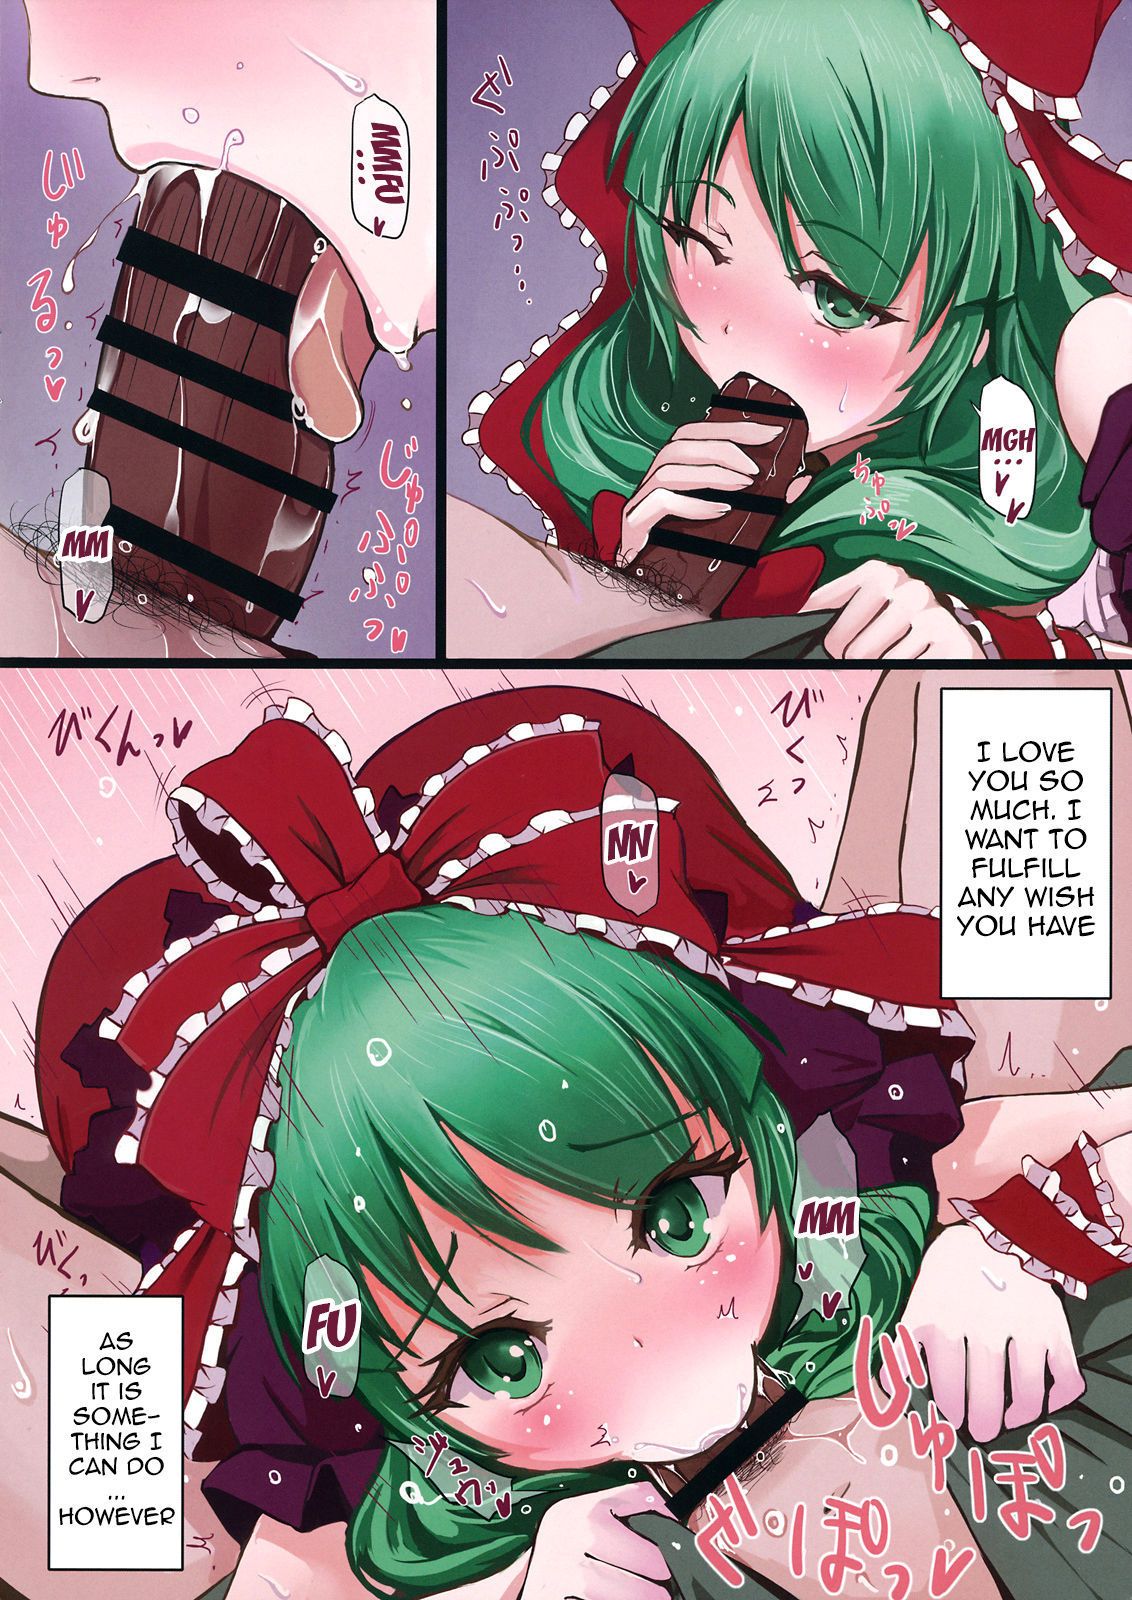 (c85) 梦想 雾 (sai go) 的 结束 的 梦想 (touhou project) {}